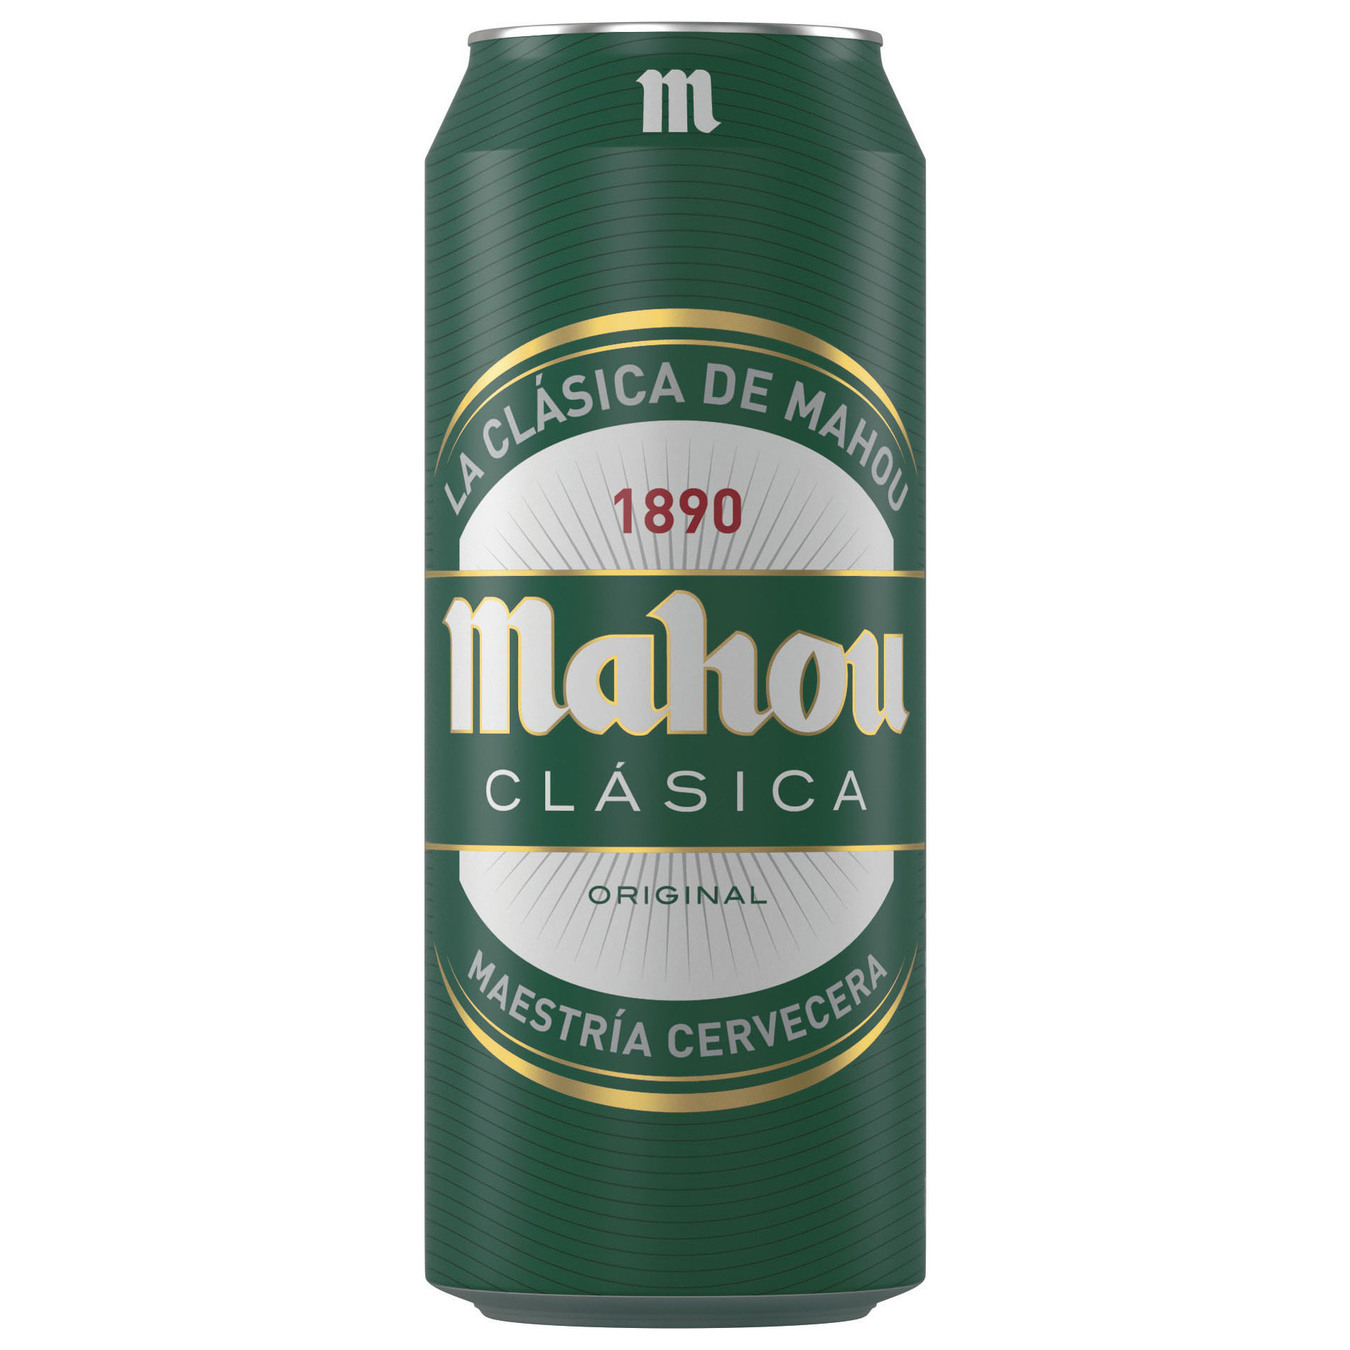 Light beer Mahou Clasica 4.8% 0.5 l iron can